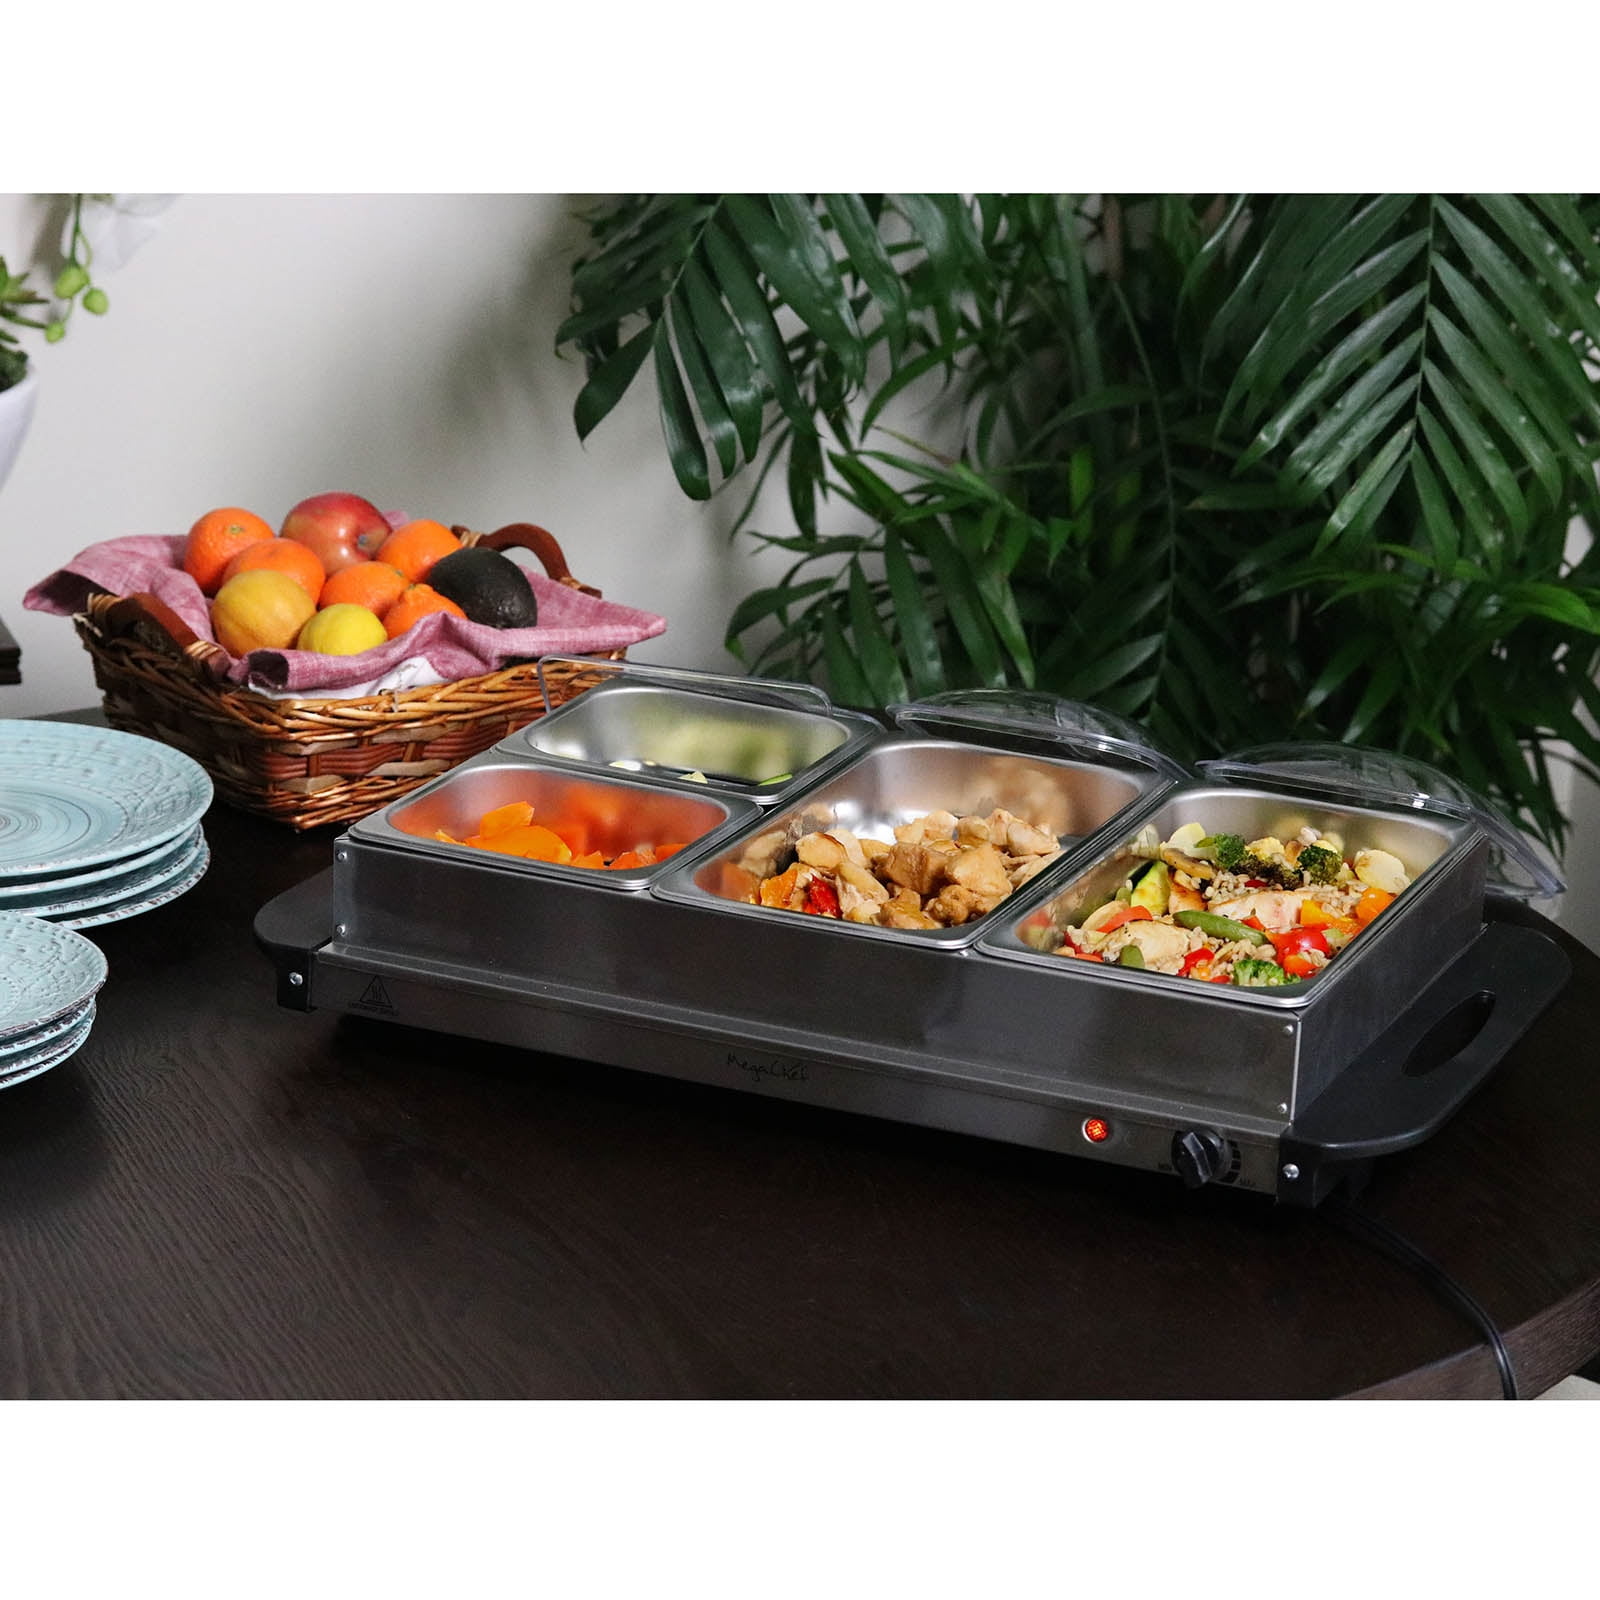 MegaChef Buffet Server & Food Warmer, 3 Removable Sectional Trays, Silver